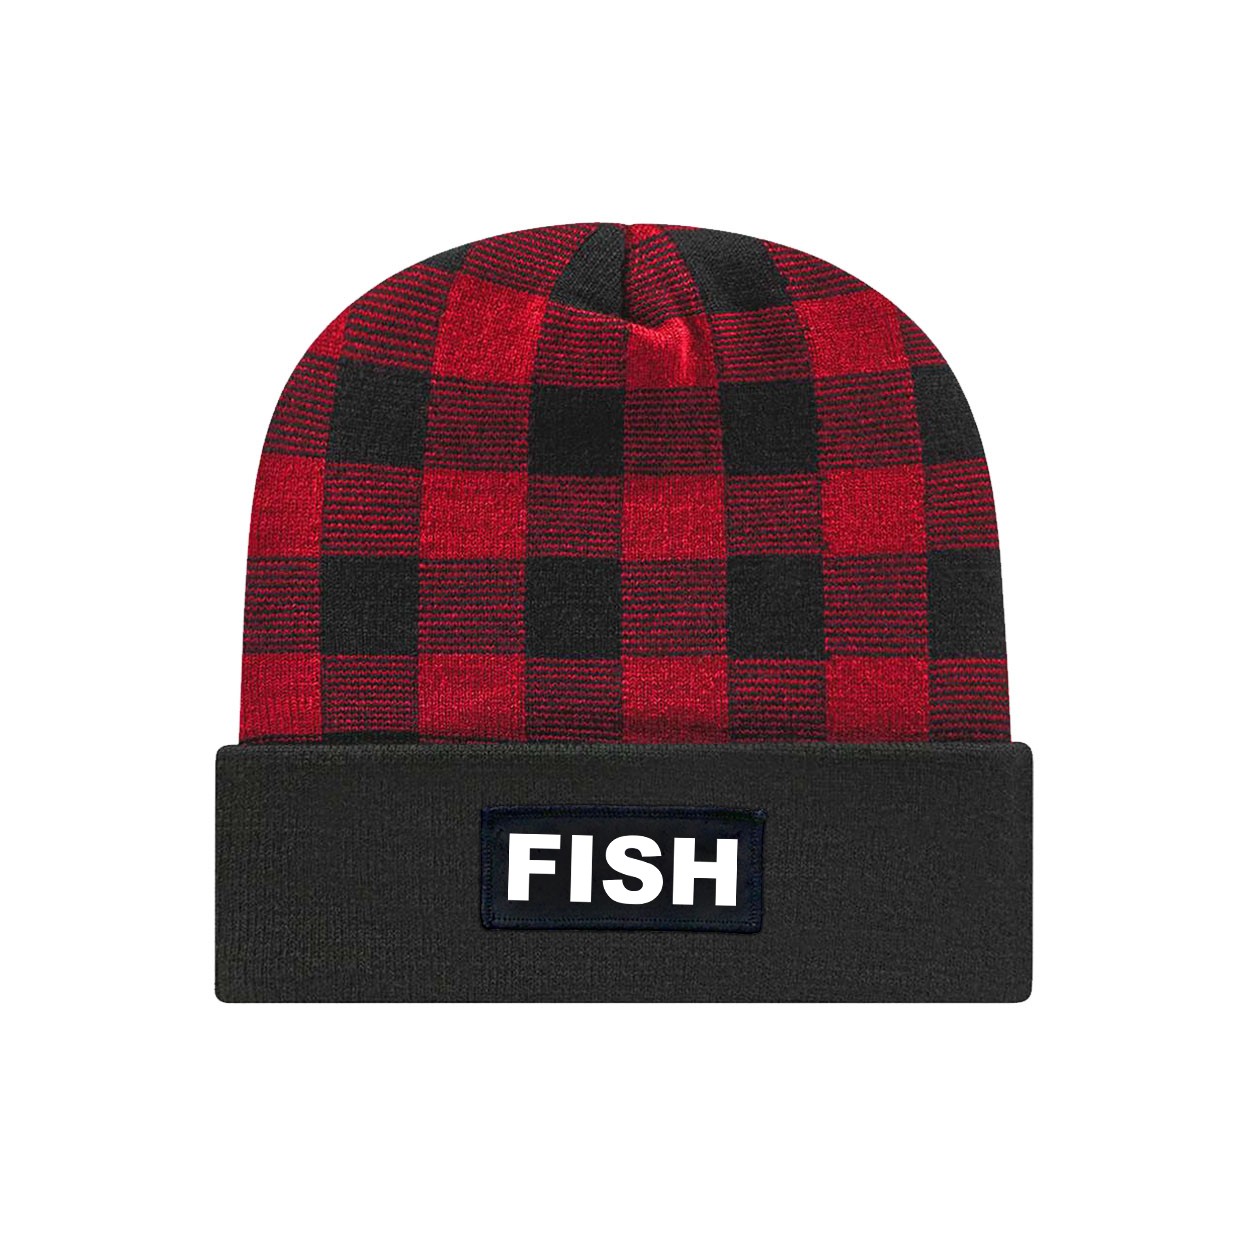 Fish Brand Logo Night Out Woven Patch Roll Up Plaid Beanie Black/True Red (White Logo)